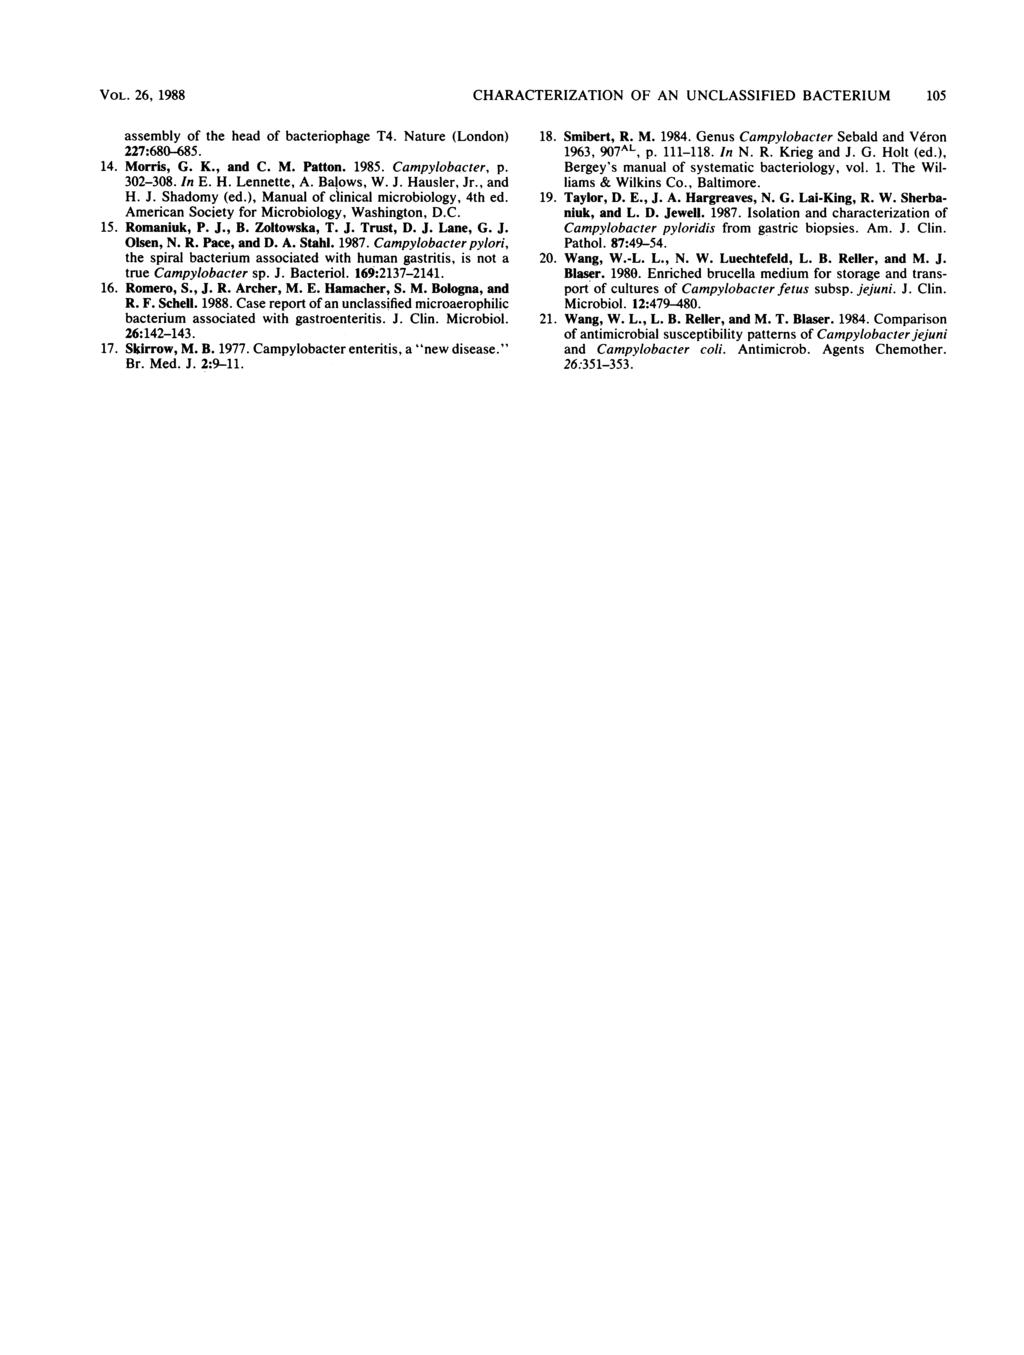 VOL. 26, 1988 CHARACTERIZATION OF AN UNCLASSIFIED BACTERIUM 105 assembly of the head of bacteriophage T4. Nature (London) 227:680-685. 14. Morris, G. K., and C. M. Patton. 1985. Campylobacter, p.